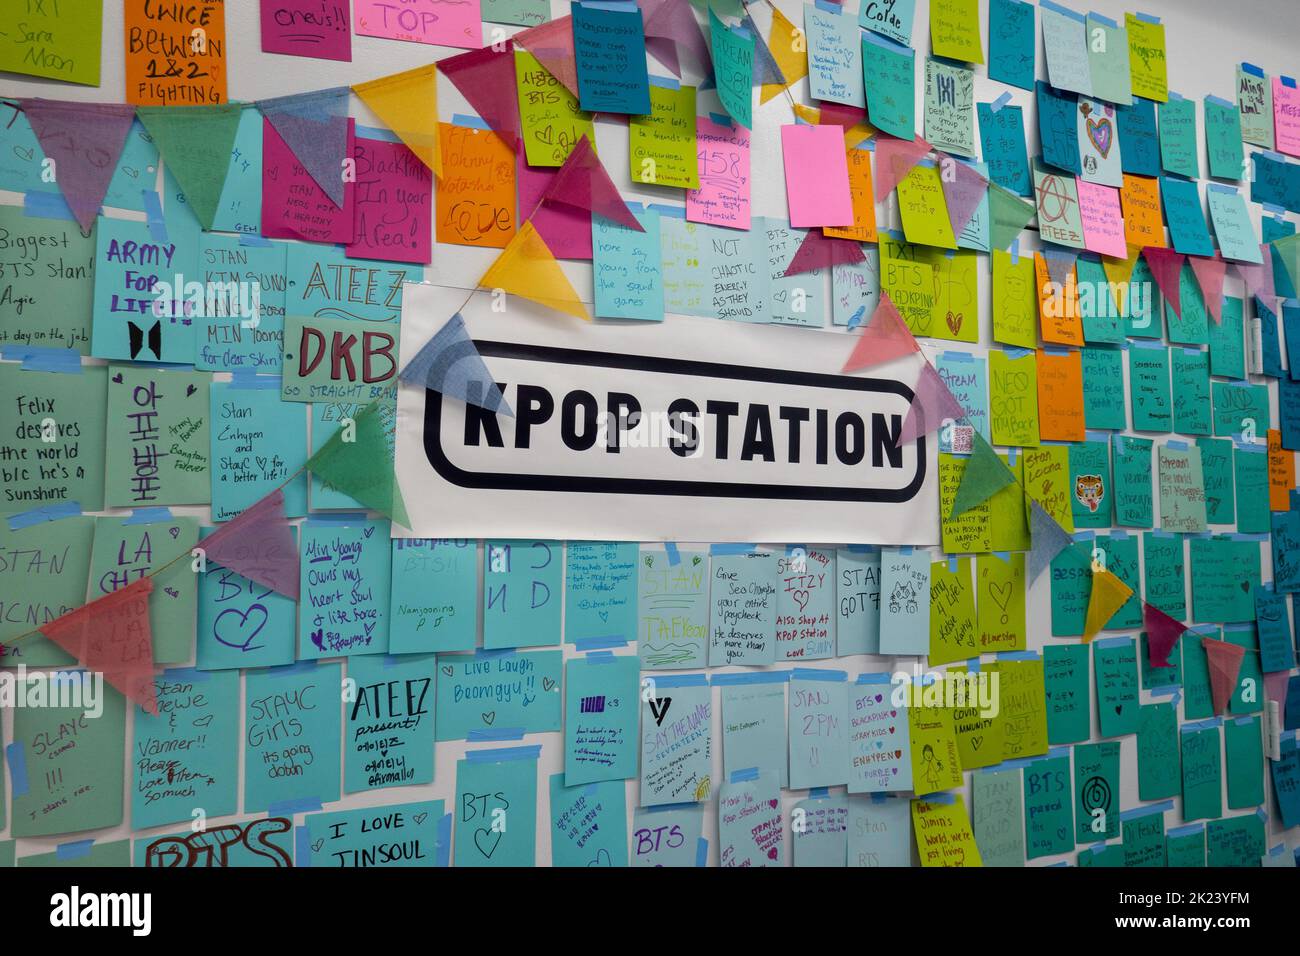 K POP Station NYC is located at 1263 Broadway in New York City, USA  2022 Stock Photo